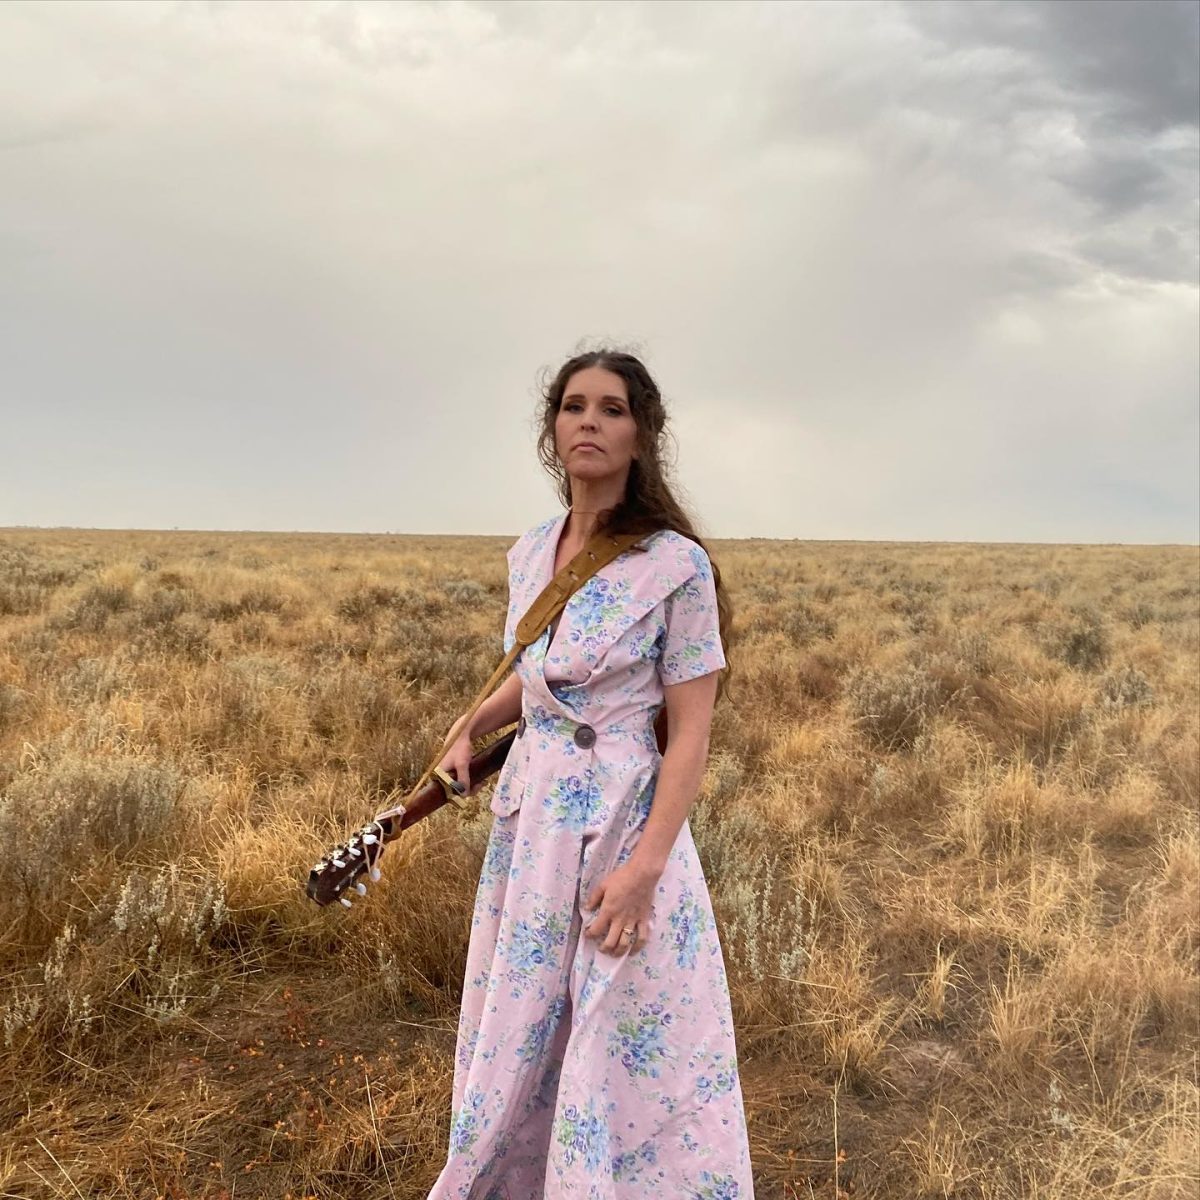 a woman holding a guitar and standing in an open field